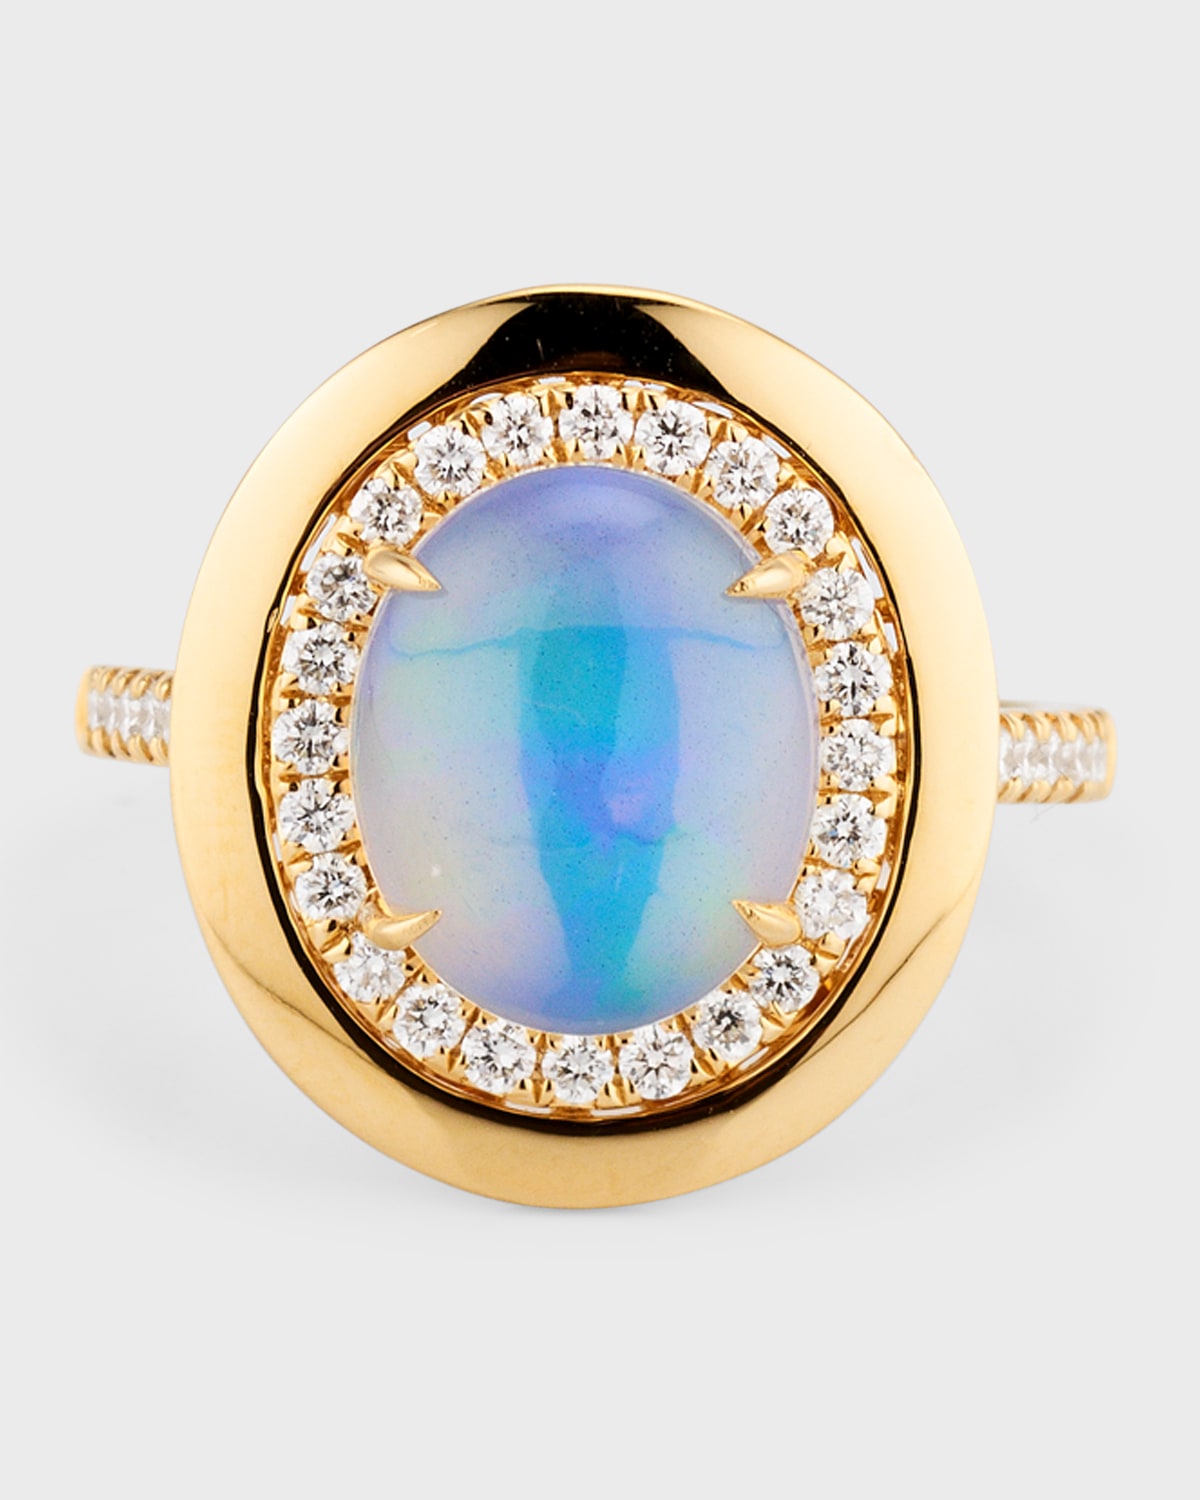 18K Yellow Gold Ring with Oval Opal and Diamonds, Size 7, 1.84tcw